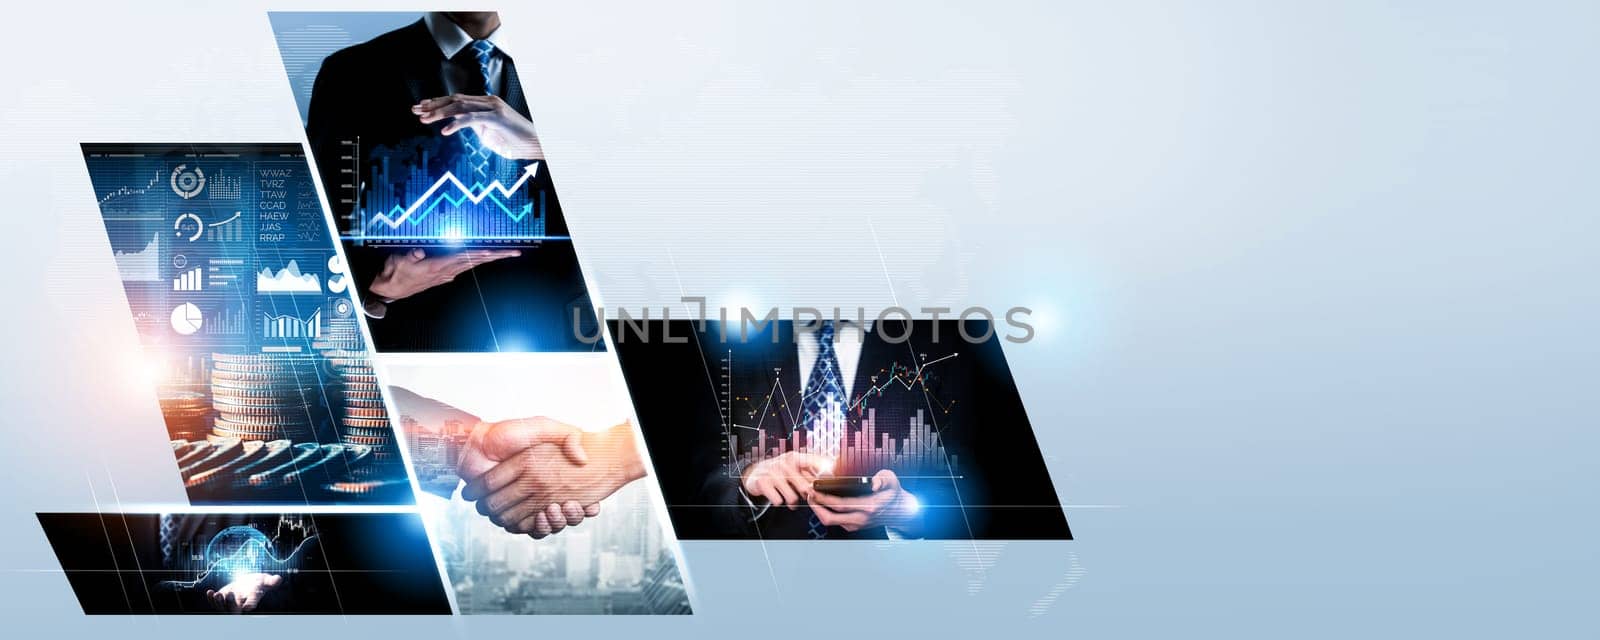 Futuristic business digital financial data technology concept for future big data analytic and business intelligence research for businessman analyst invest decisions making panoramic banner kudos